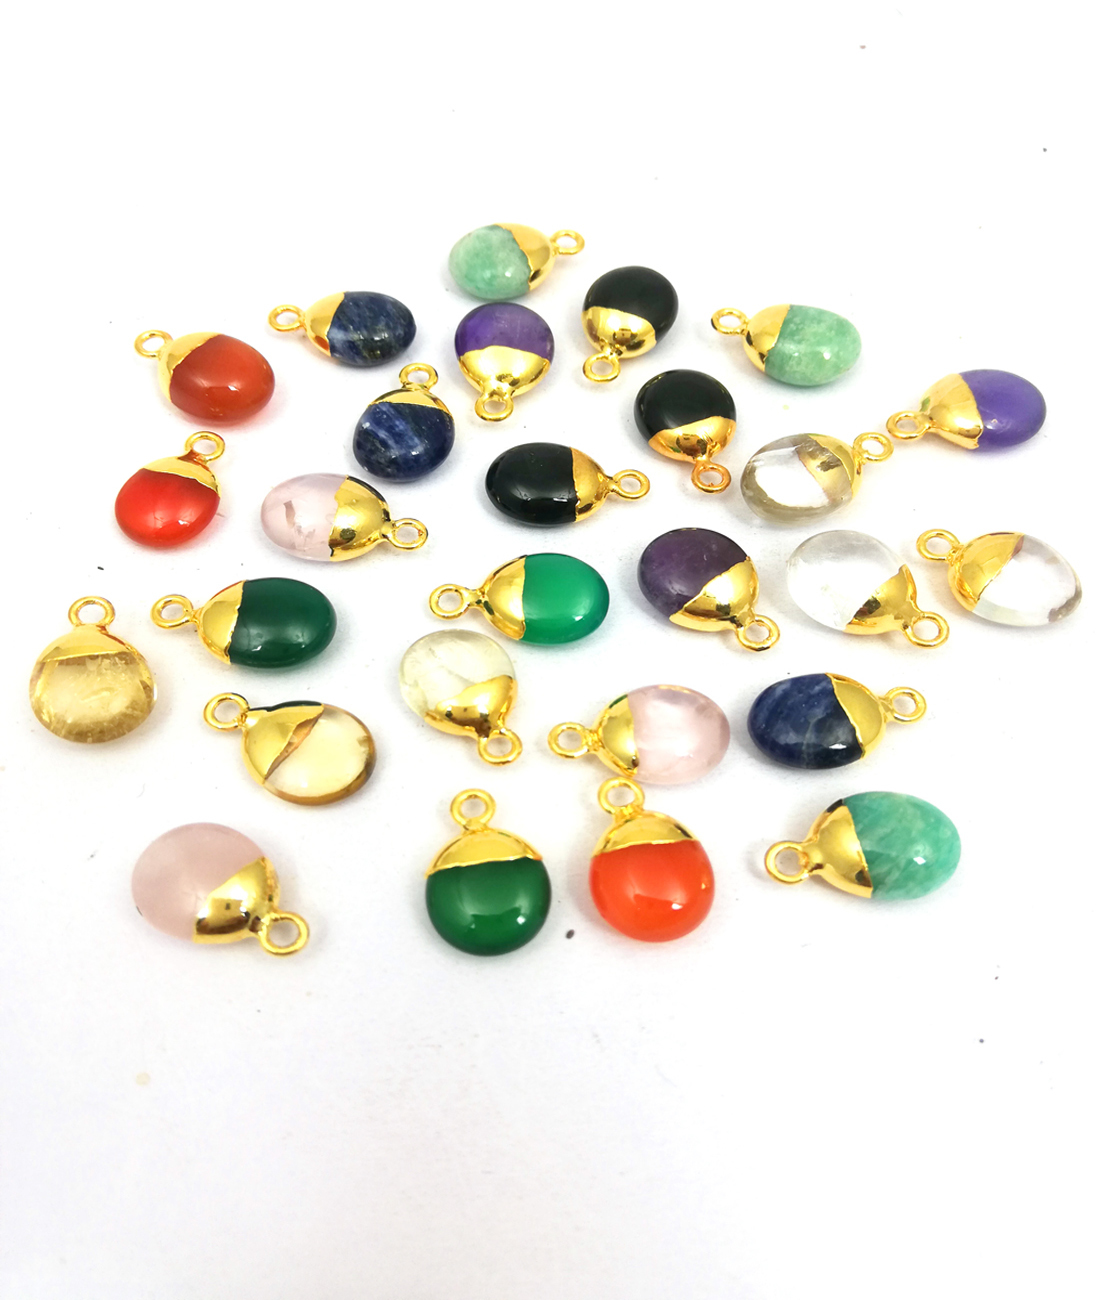 Birthstone Gold Electroplated Charms Pendant - Smooth Rough Gemstone Pendant